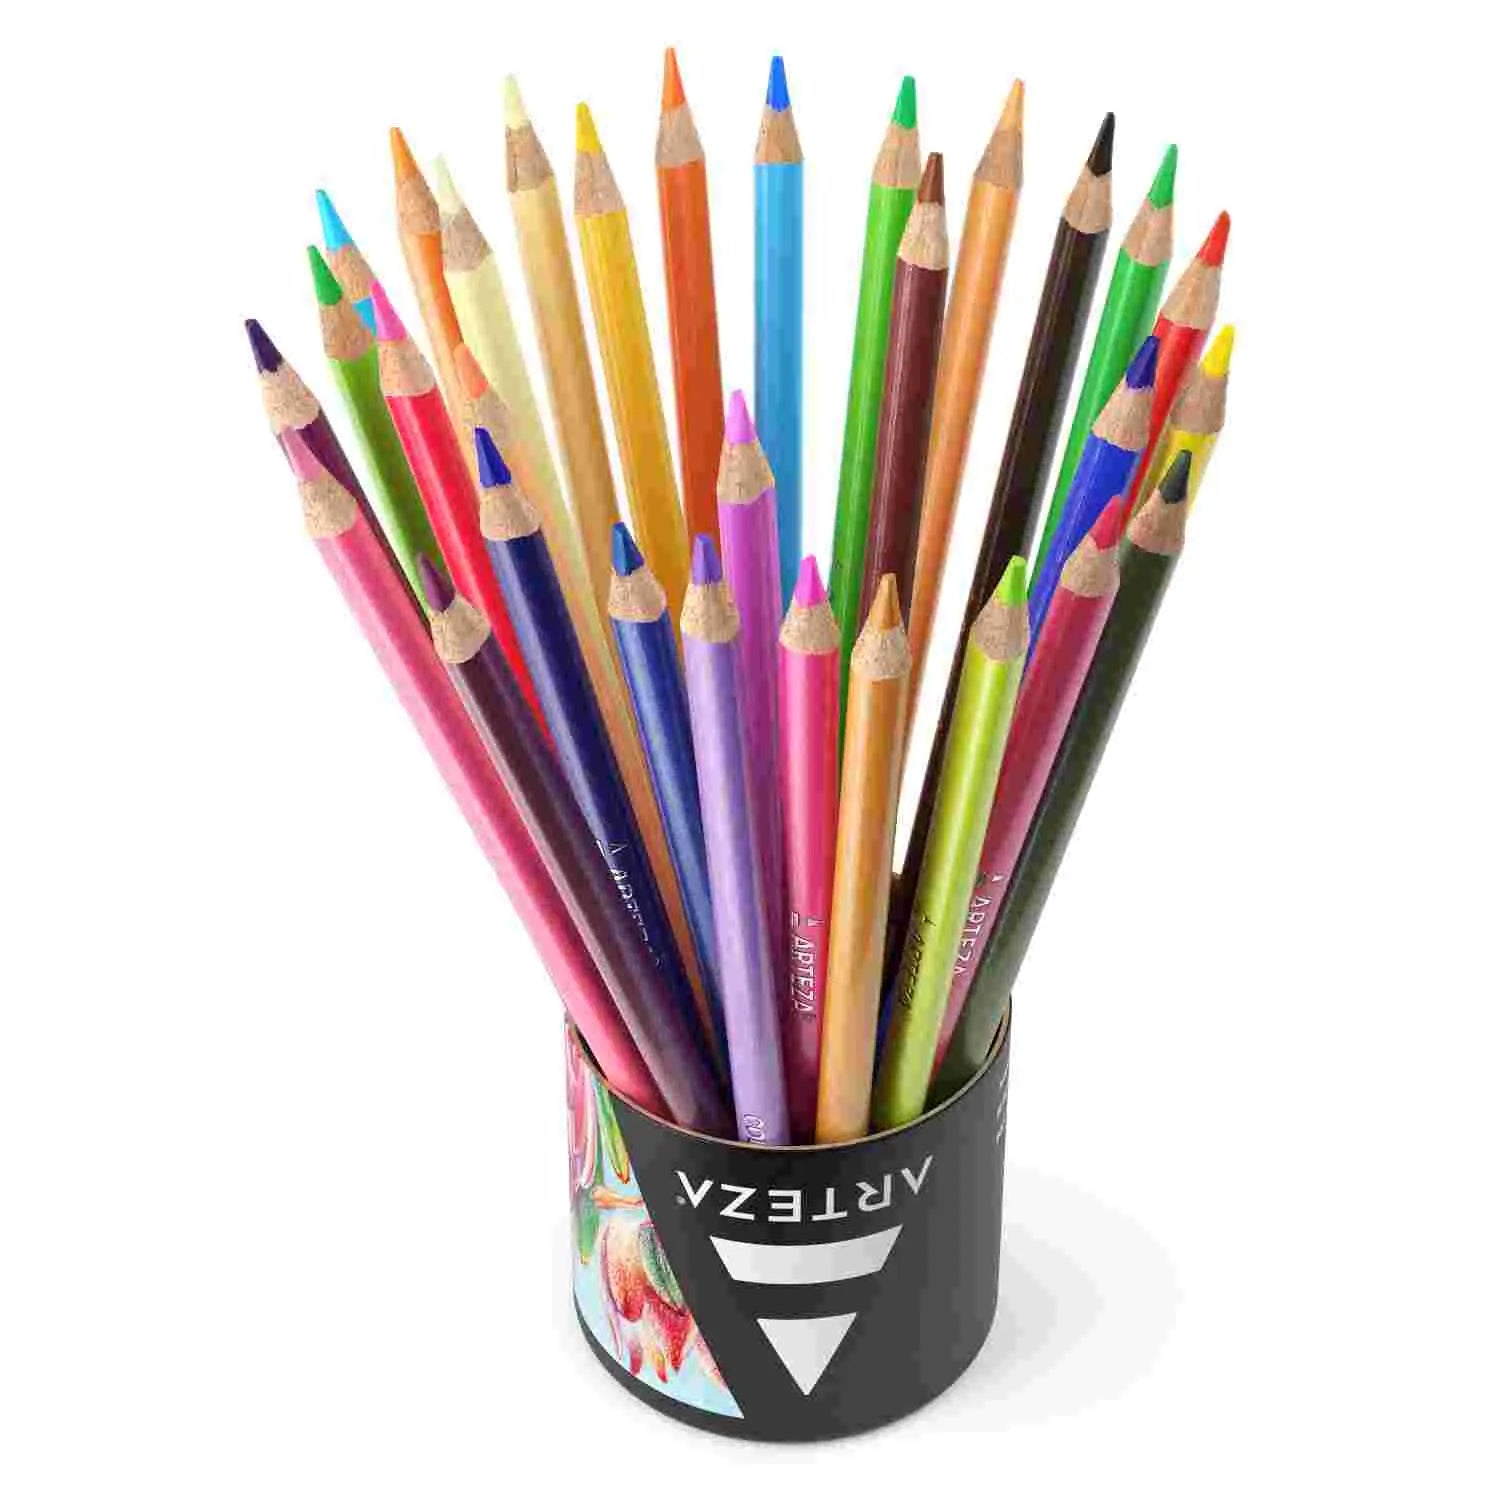 https://canvazo.com/cdn/shop/files/ARTEZA-Colored-Pencils-for-Adult-Coloring_-48-Colors_-Soft-Drawing-Pencils_-Highly-Pigmented_-Wax-Based-Core_-Professional-Art-Supplies-for-Artists_-Pencil-Set-for-Adults-and-Teens-Ar_b6de97d4-3de7-4d0a-9d00-96df8dfe3e85.jpg?v=1695380941